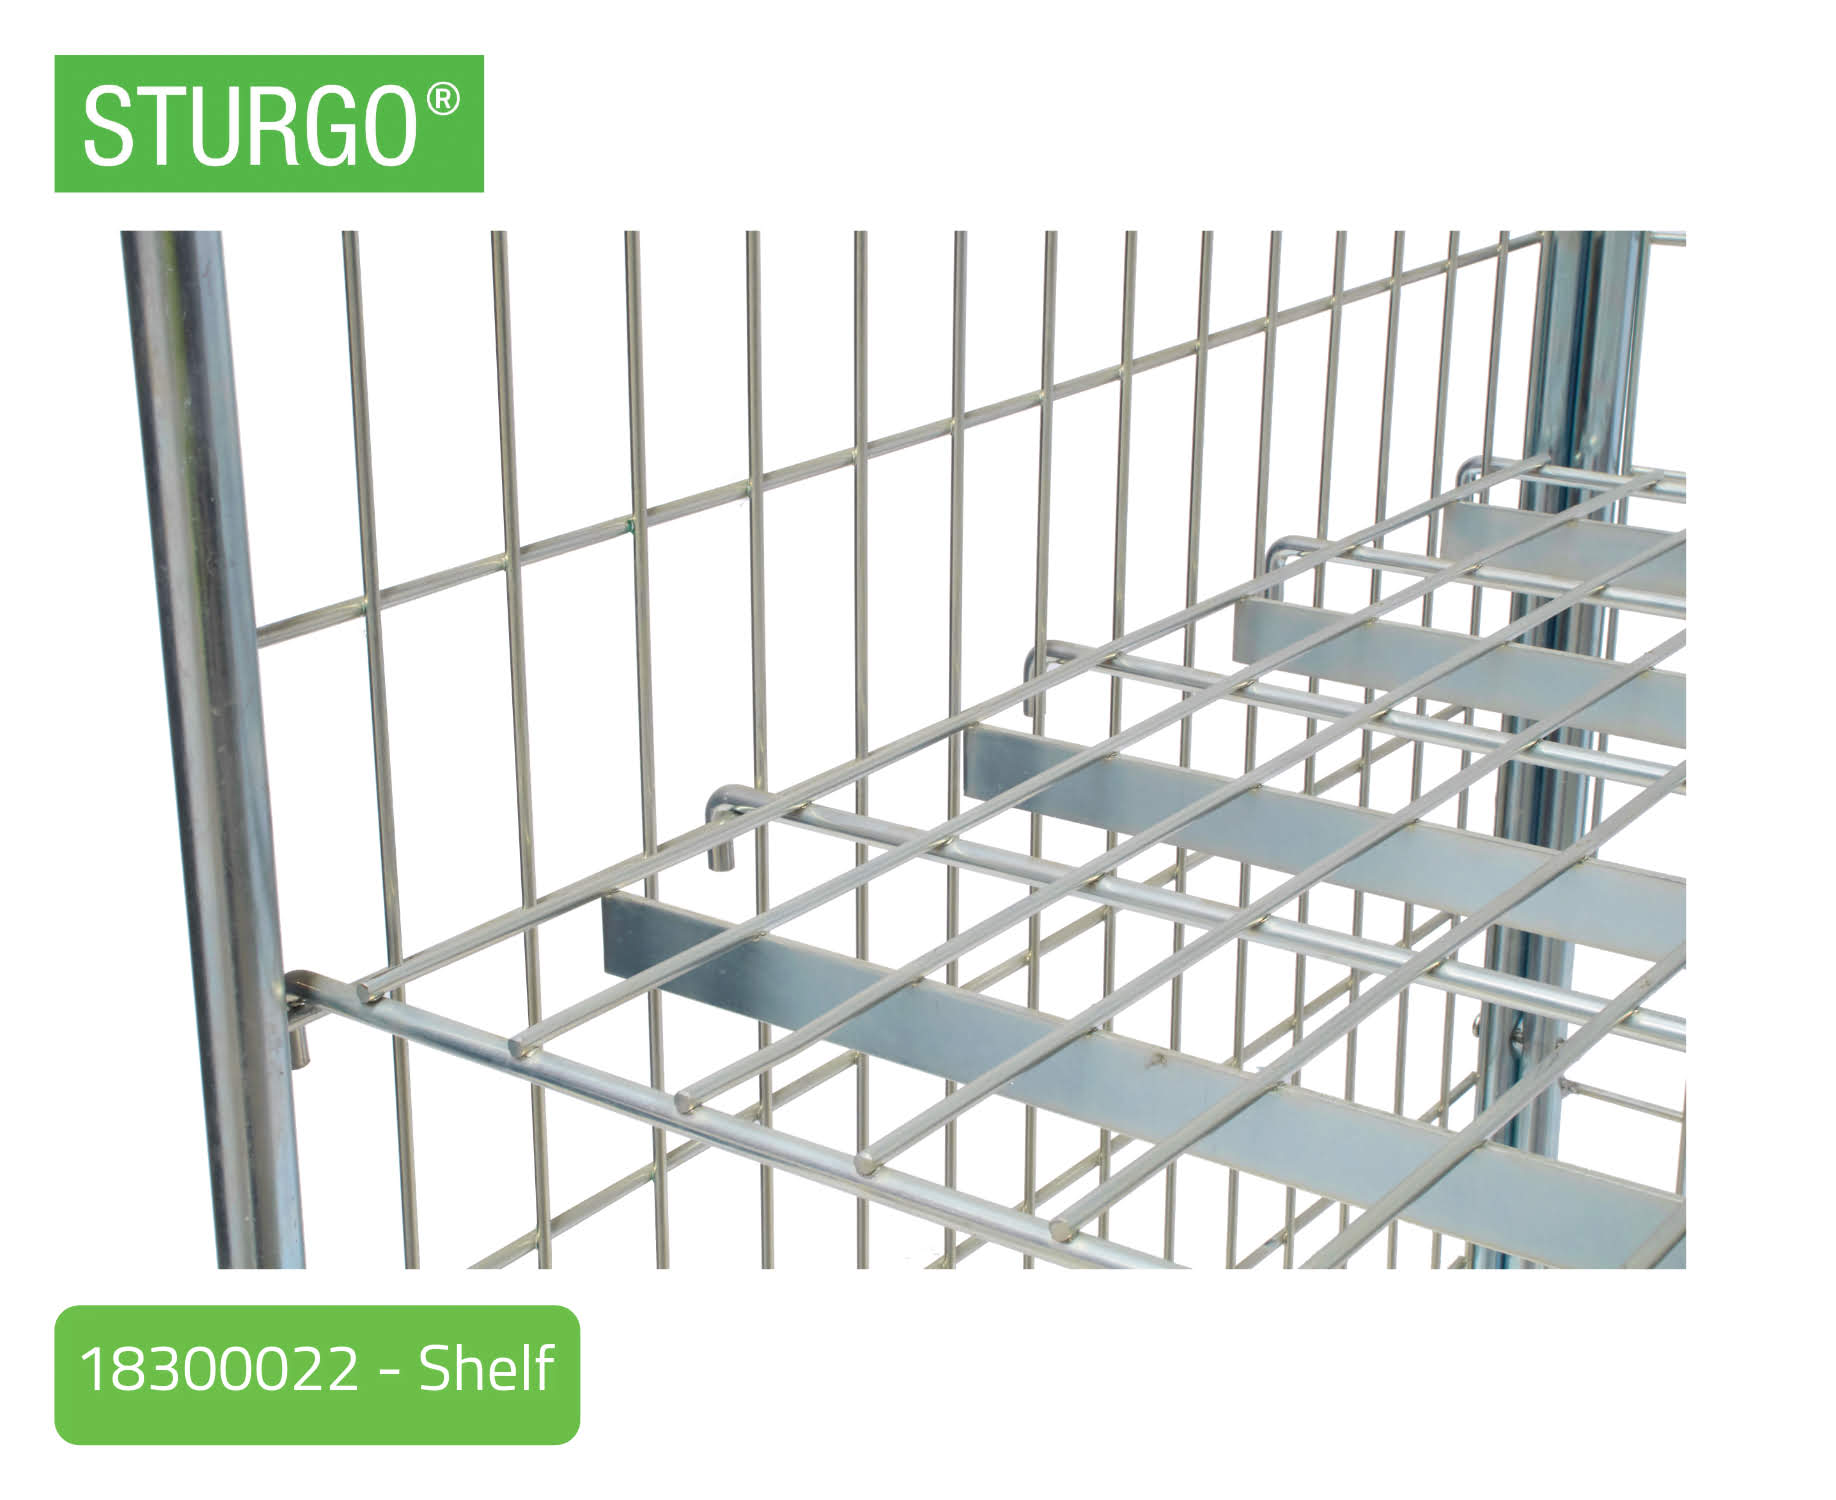 STURGO® Security Double Roll Cage Trolley